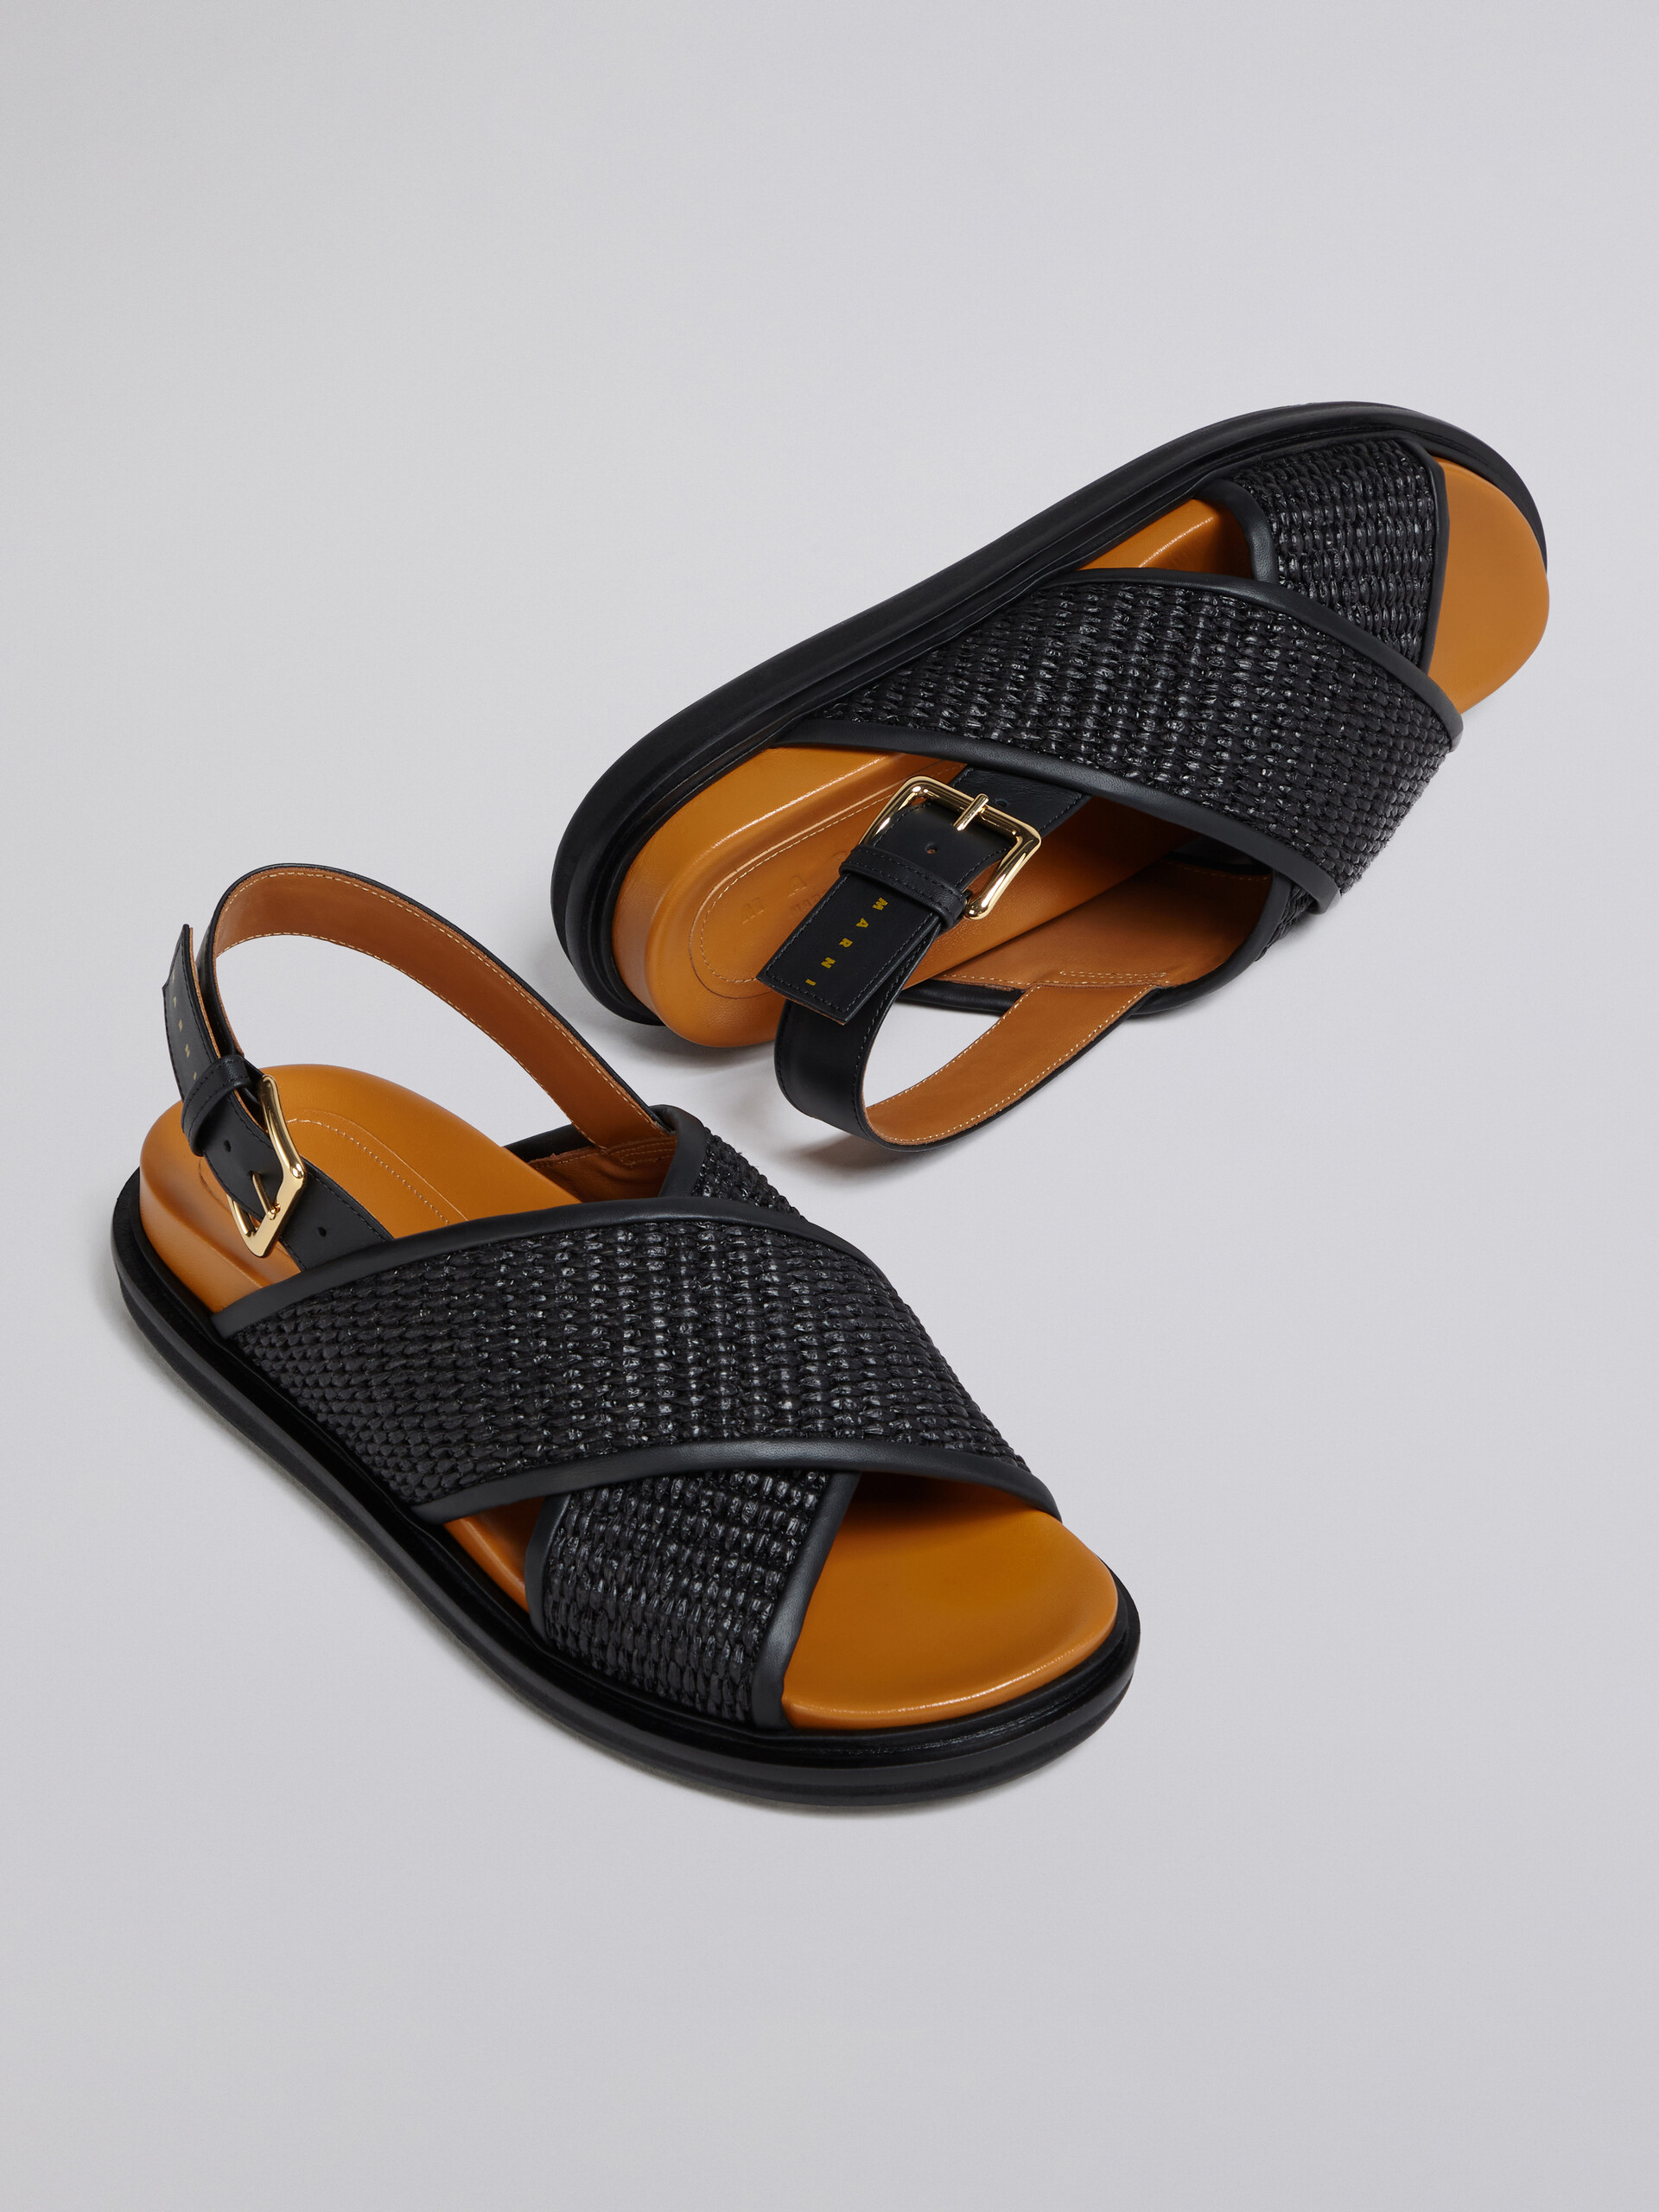 Fussbet sandals in brown leather and raffia-effect fabric - Sandals - Image 5